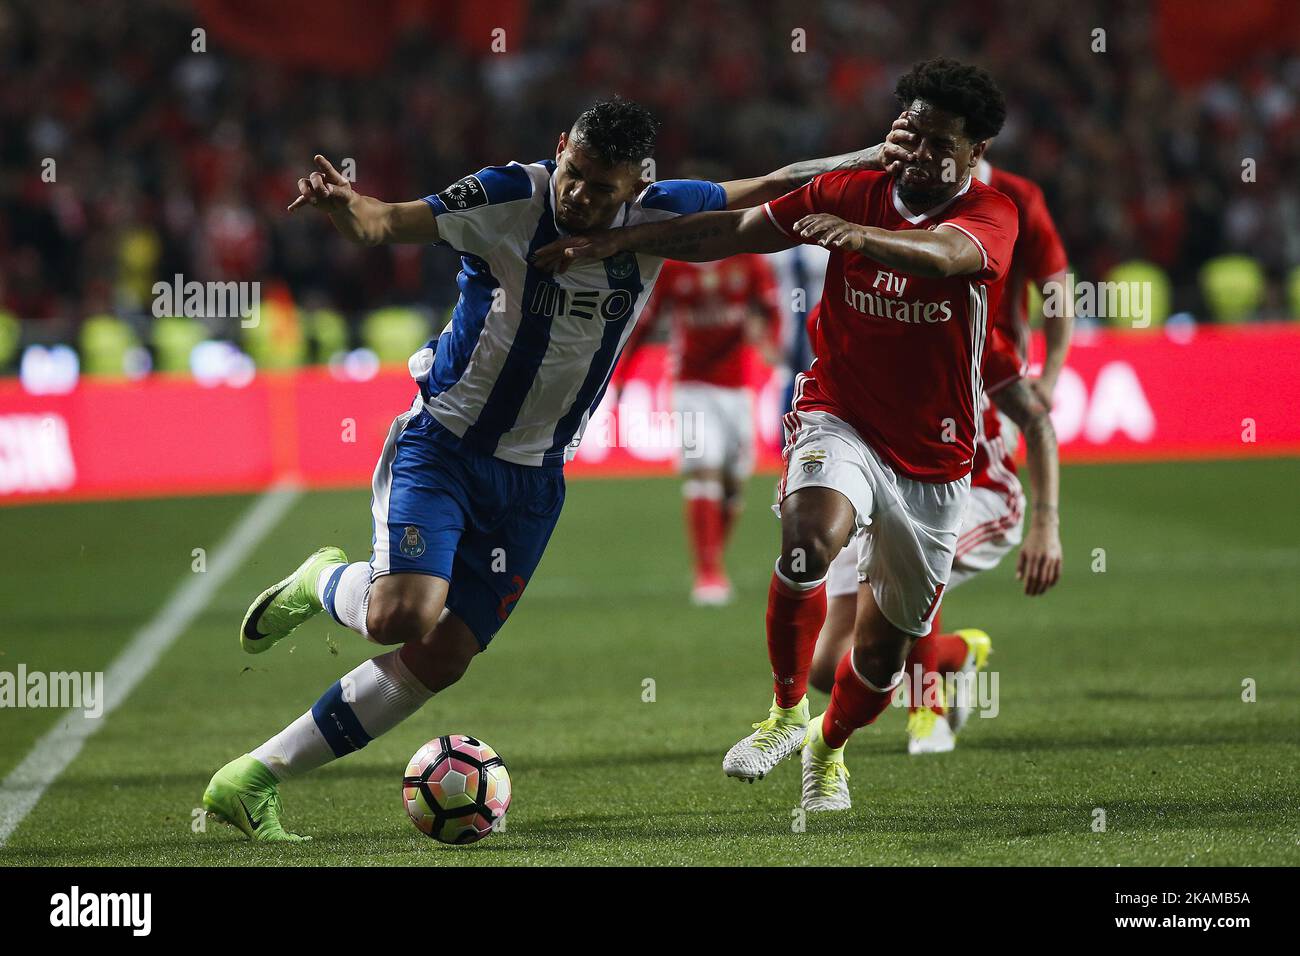 Porto's forward Soares (L) vies for the ball with Benfica's defender Eliseu (R) during Premier League 2016/17 match between SL Benfica vs FC Porto, in Lisbon, on April 1, 2017. (Photo by Carlos Palma/NurPhoto) *** Please Use Credit from Credit Field *** Stock Photo